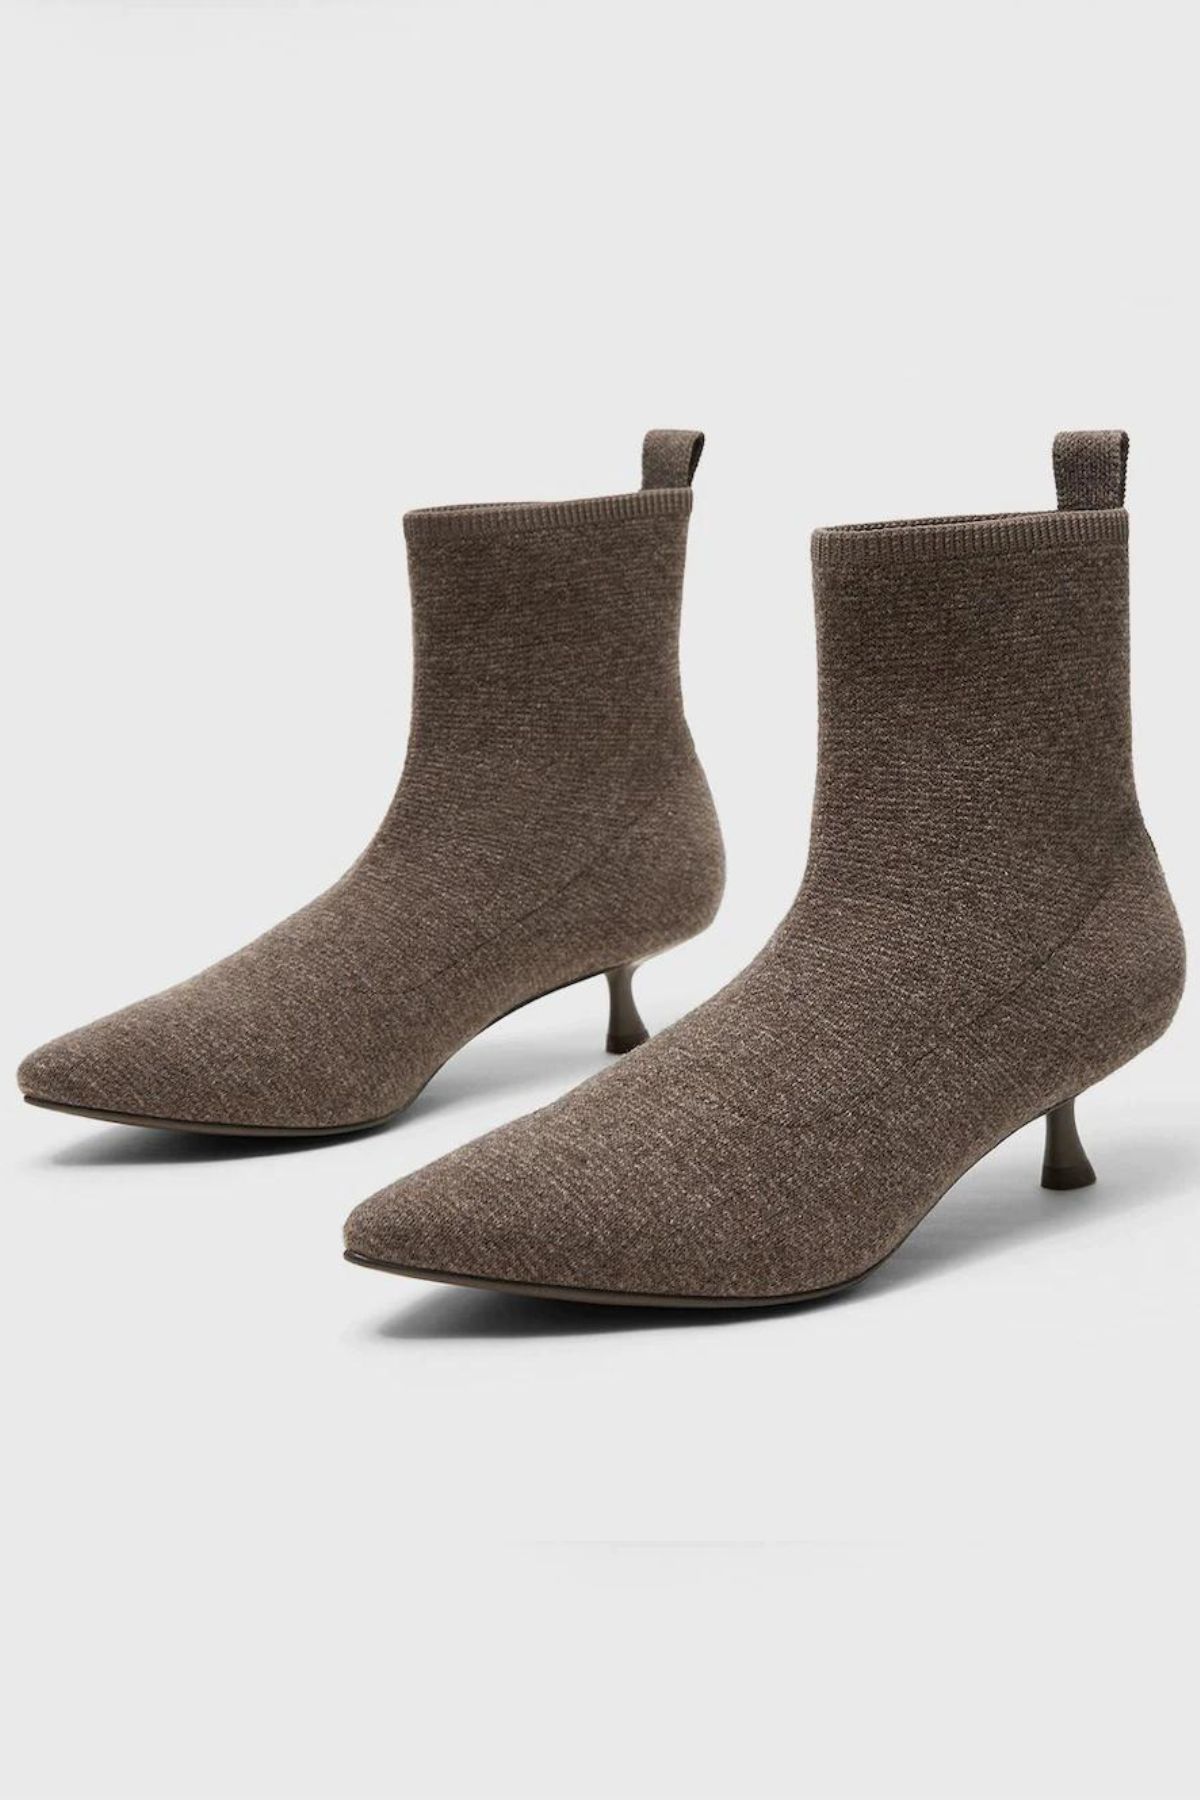 Types of Boots 2023 | Vivaia Naomi Wool Pointed-Toe Heeled Boots